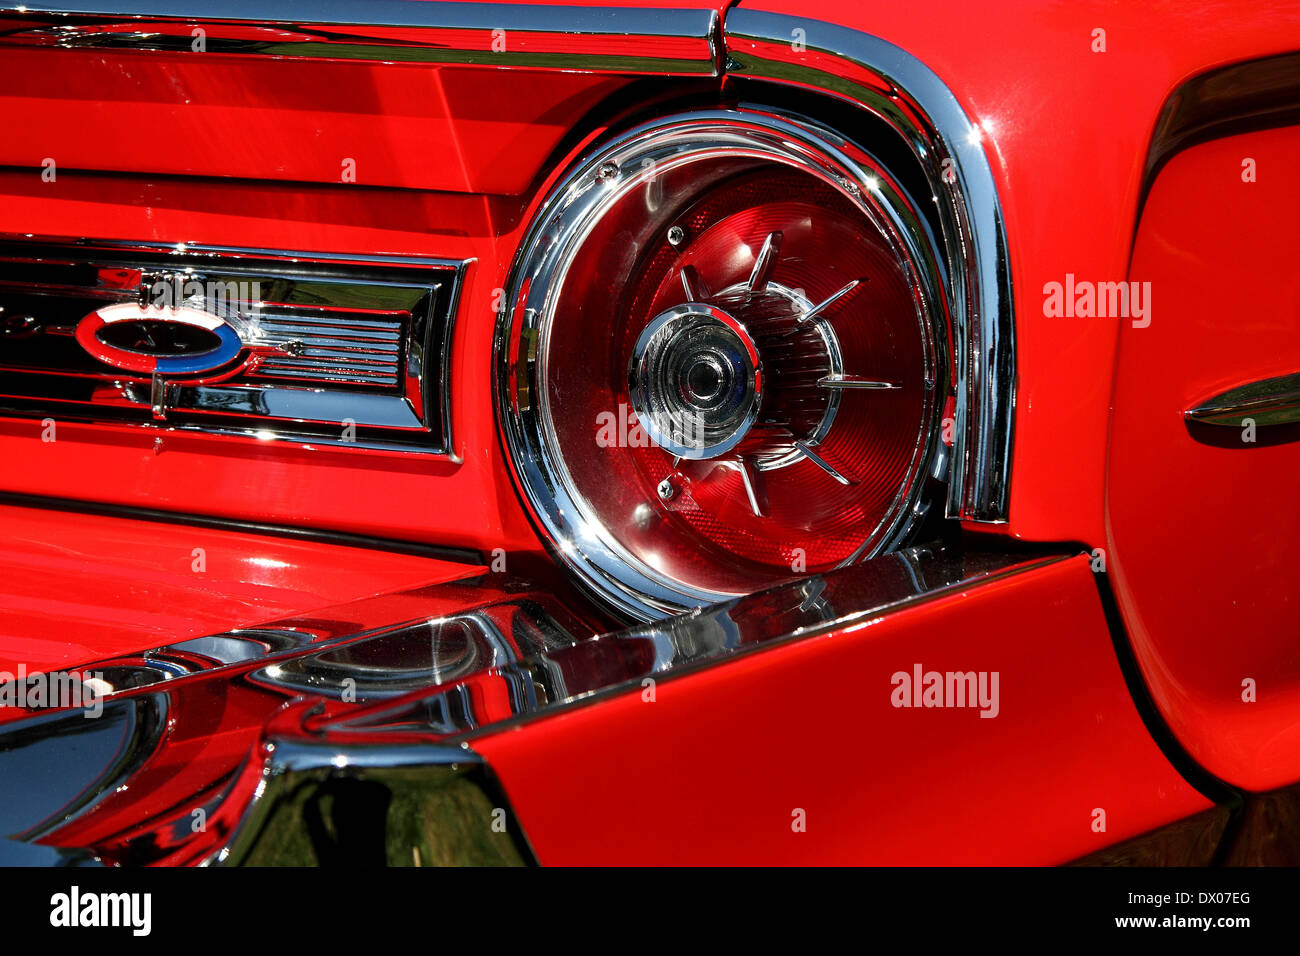 Vintage Ford Car Stock Photo